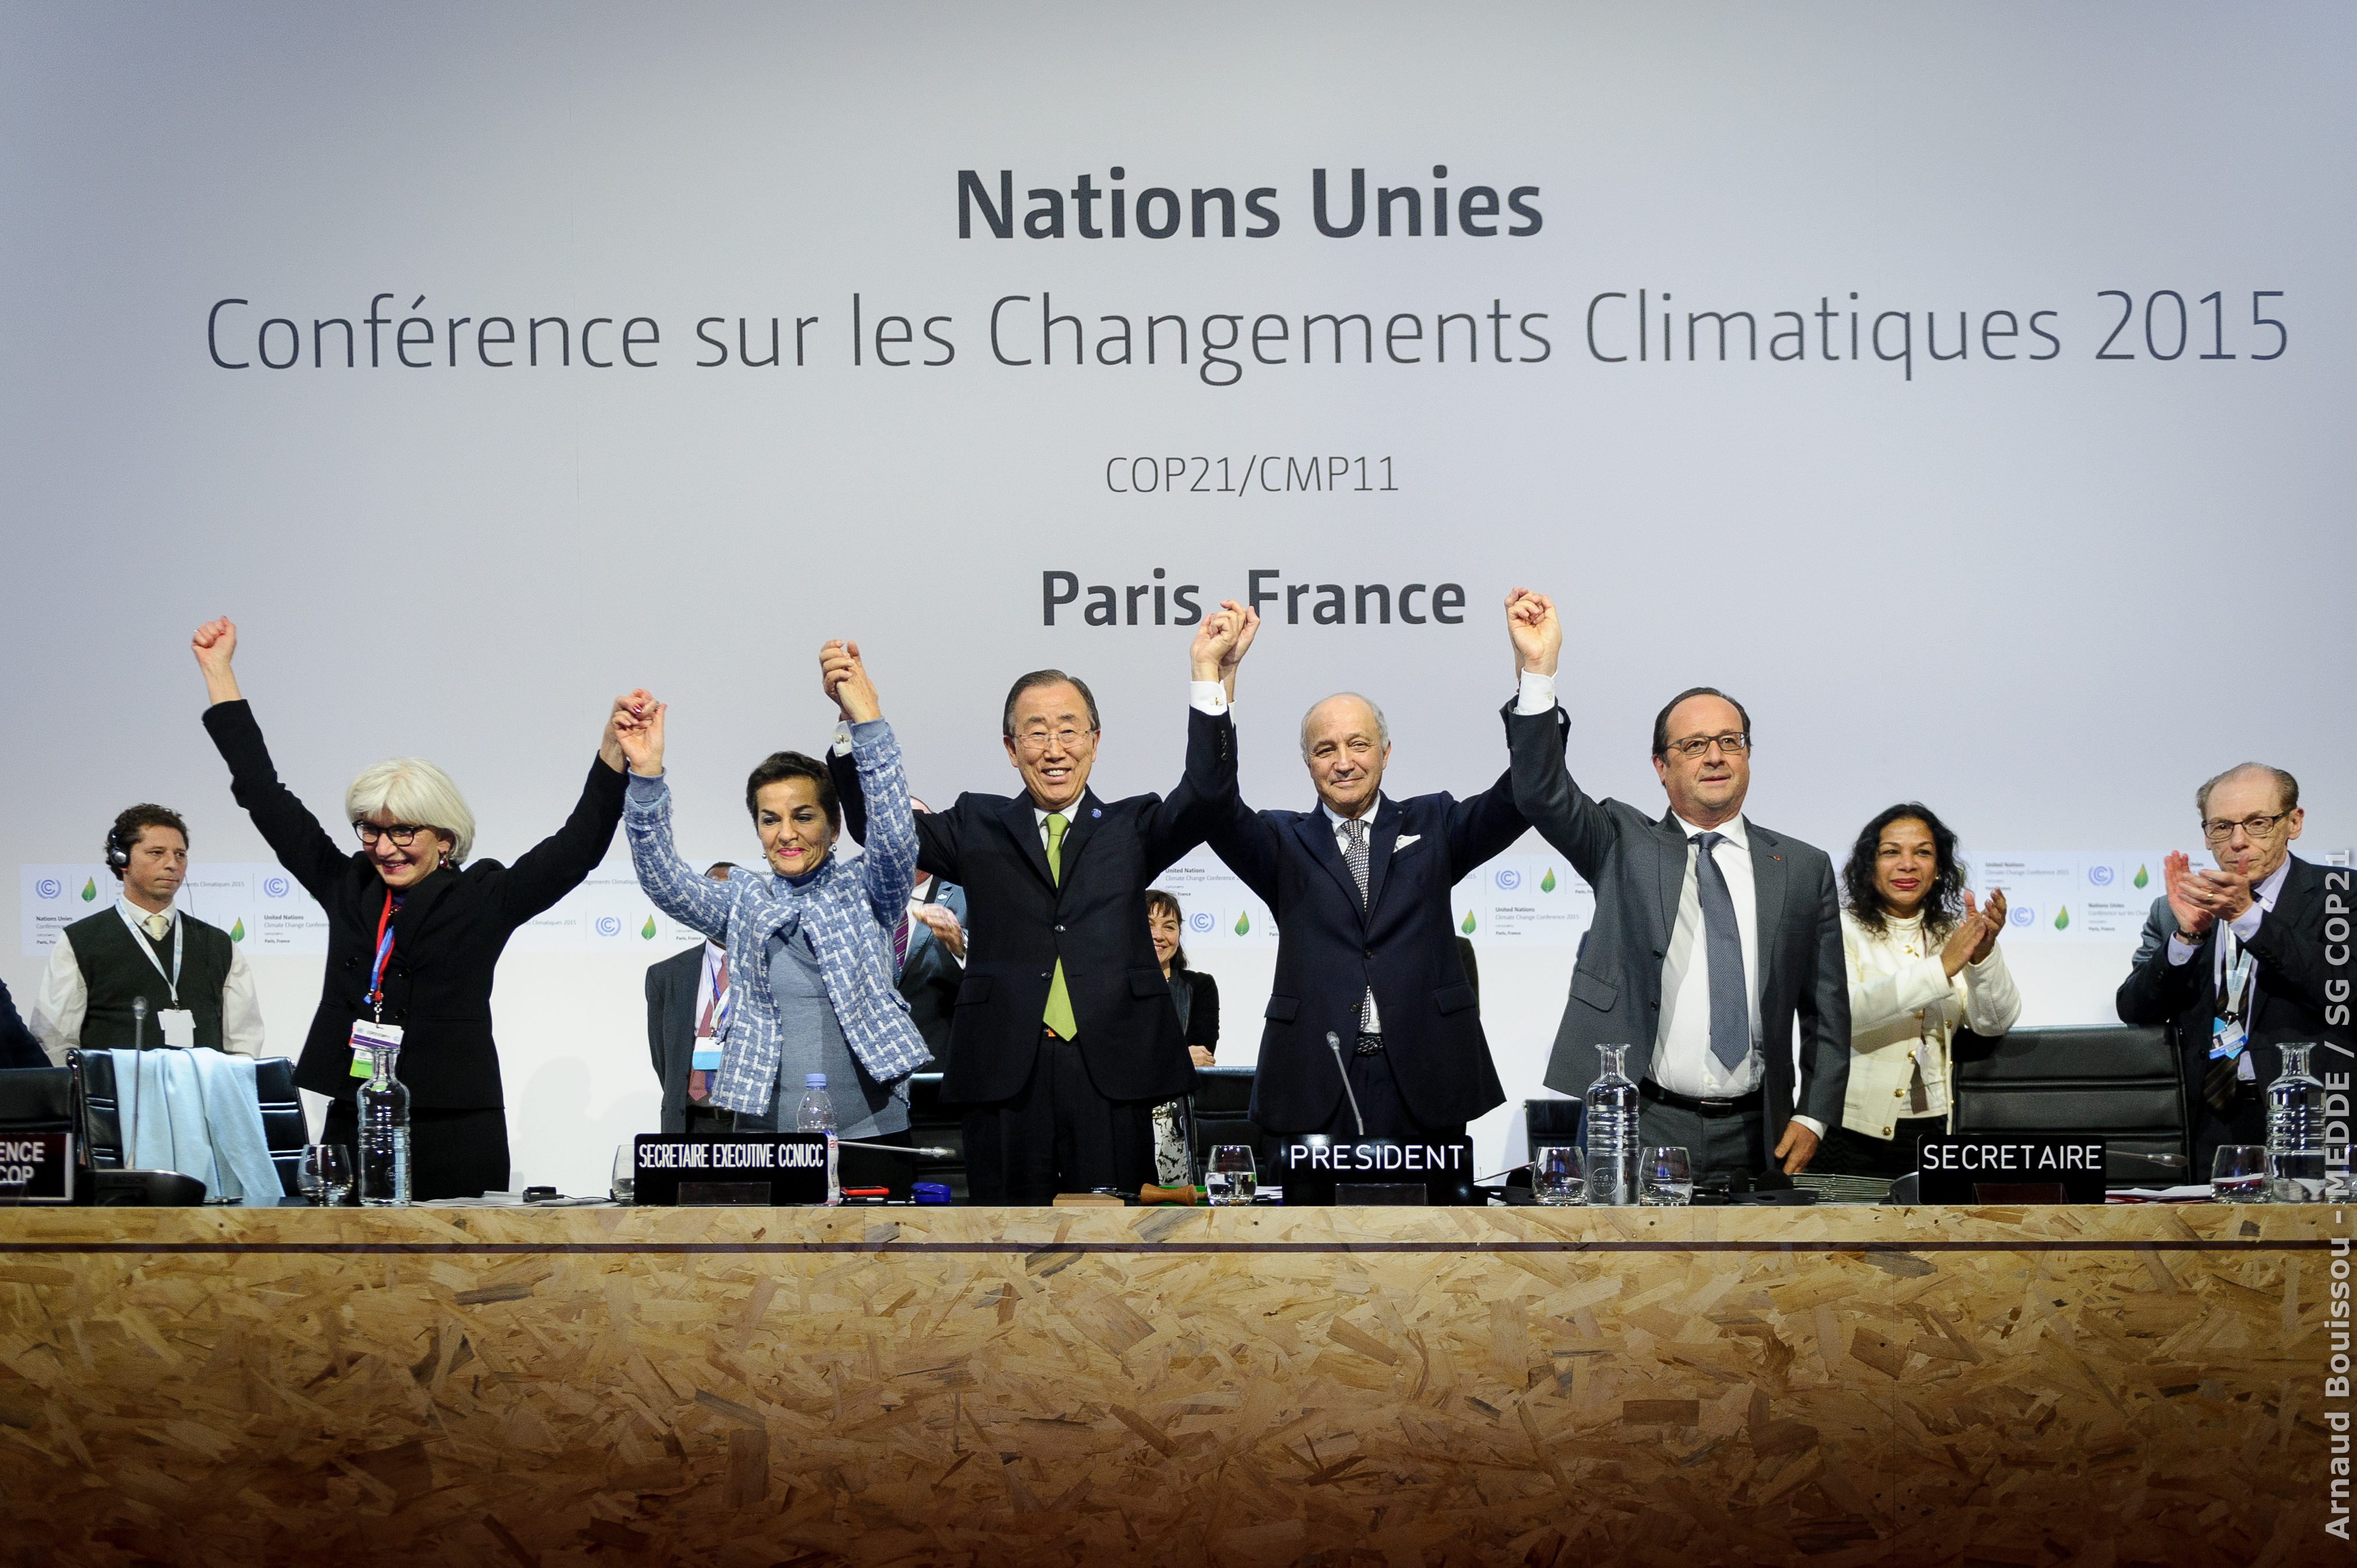 The top leaders of the UN climate change conference raise their hands after the approval of the Paris Agreement, at Le Bourget, France, December 12, 2015. Arnaud Bouissoi/COP21 